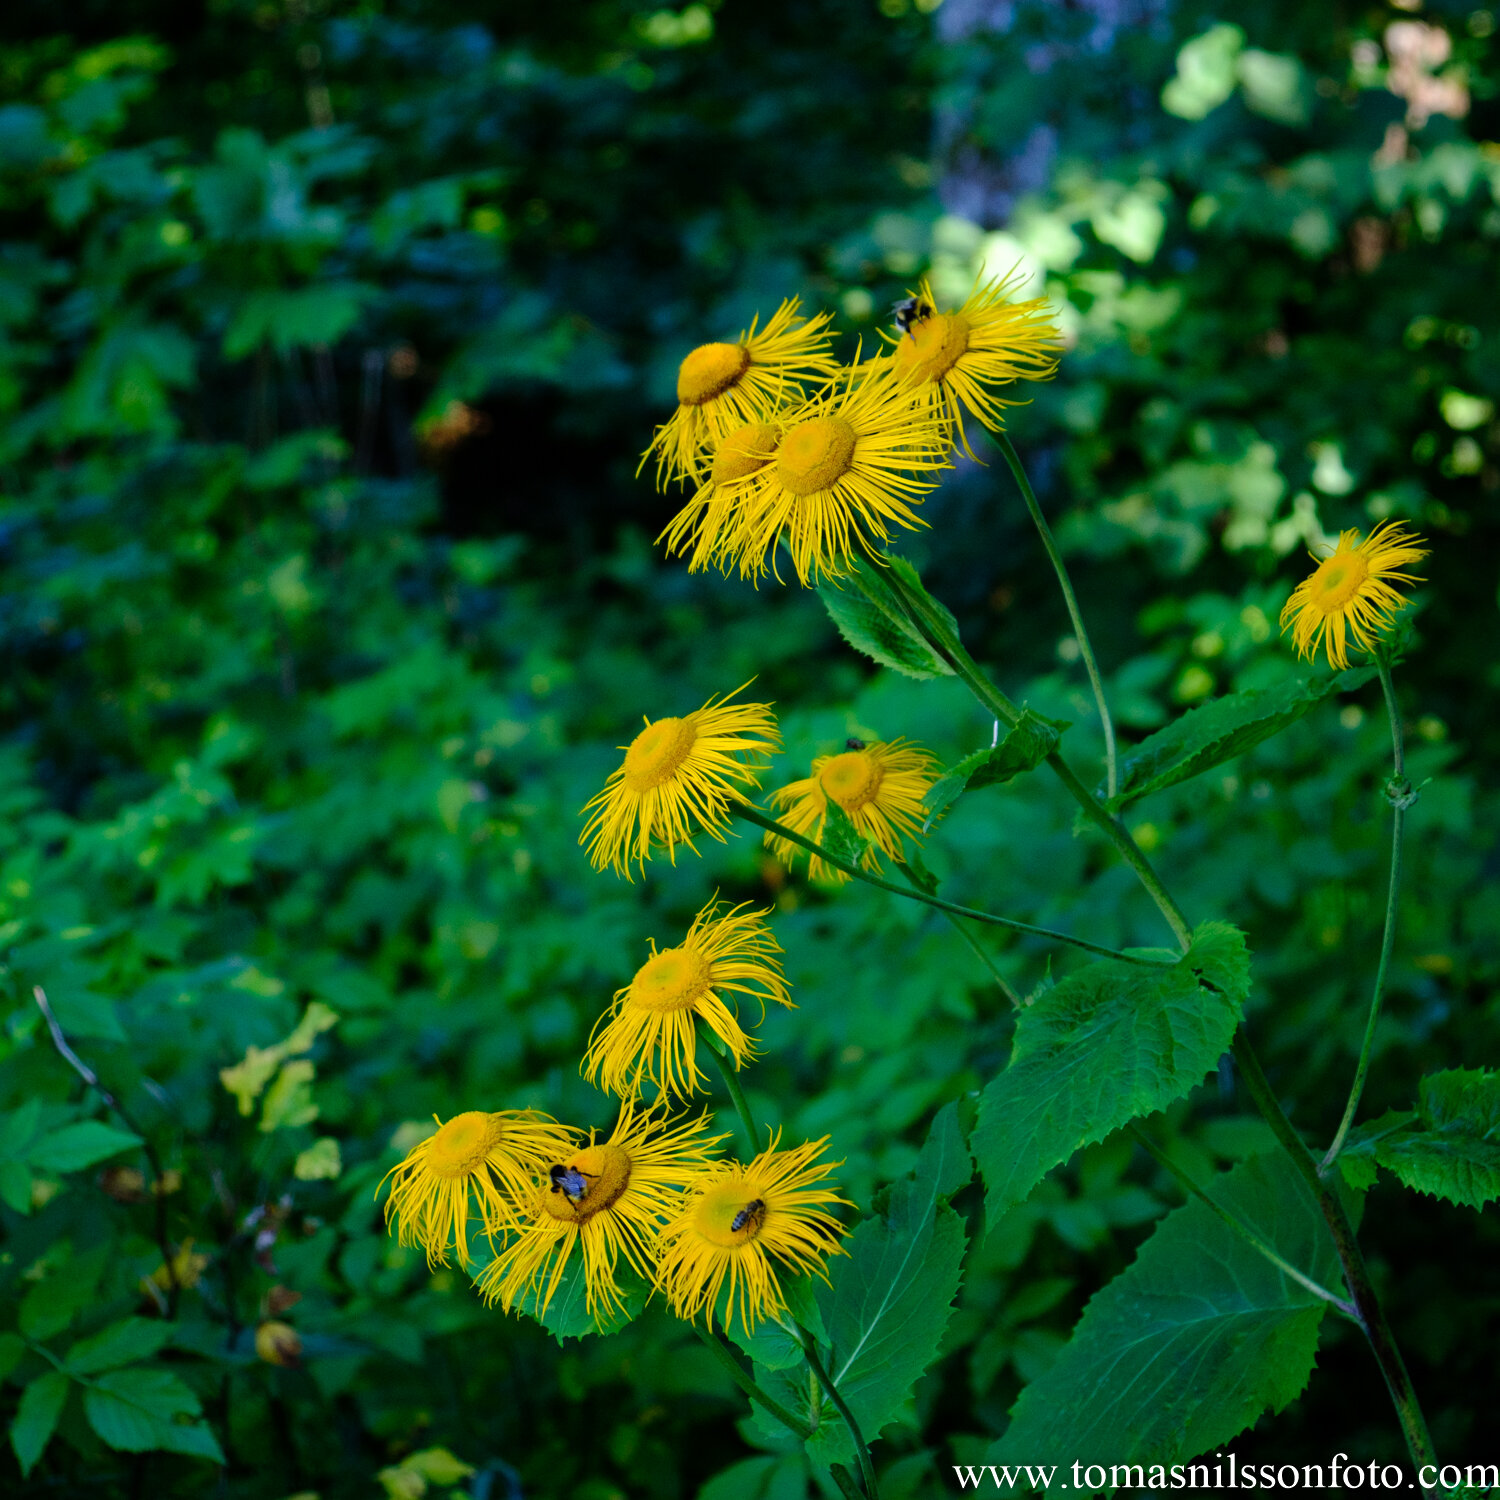 Day 223 - August 10: Yellow